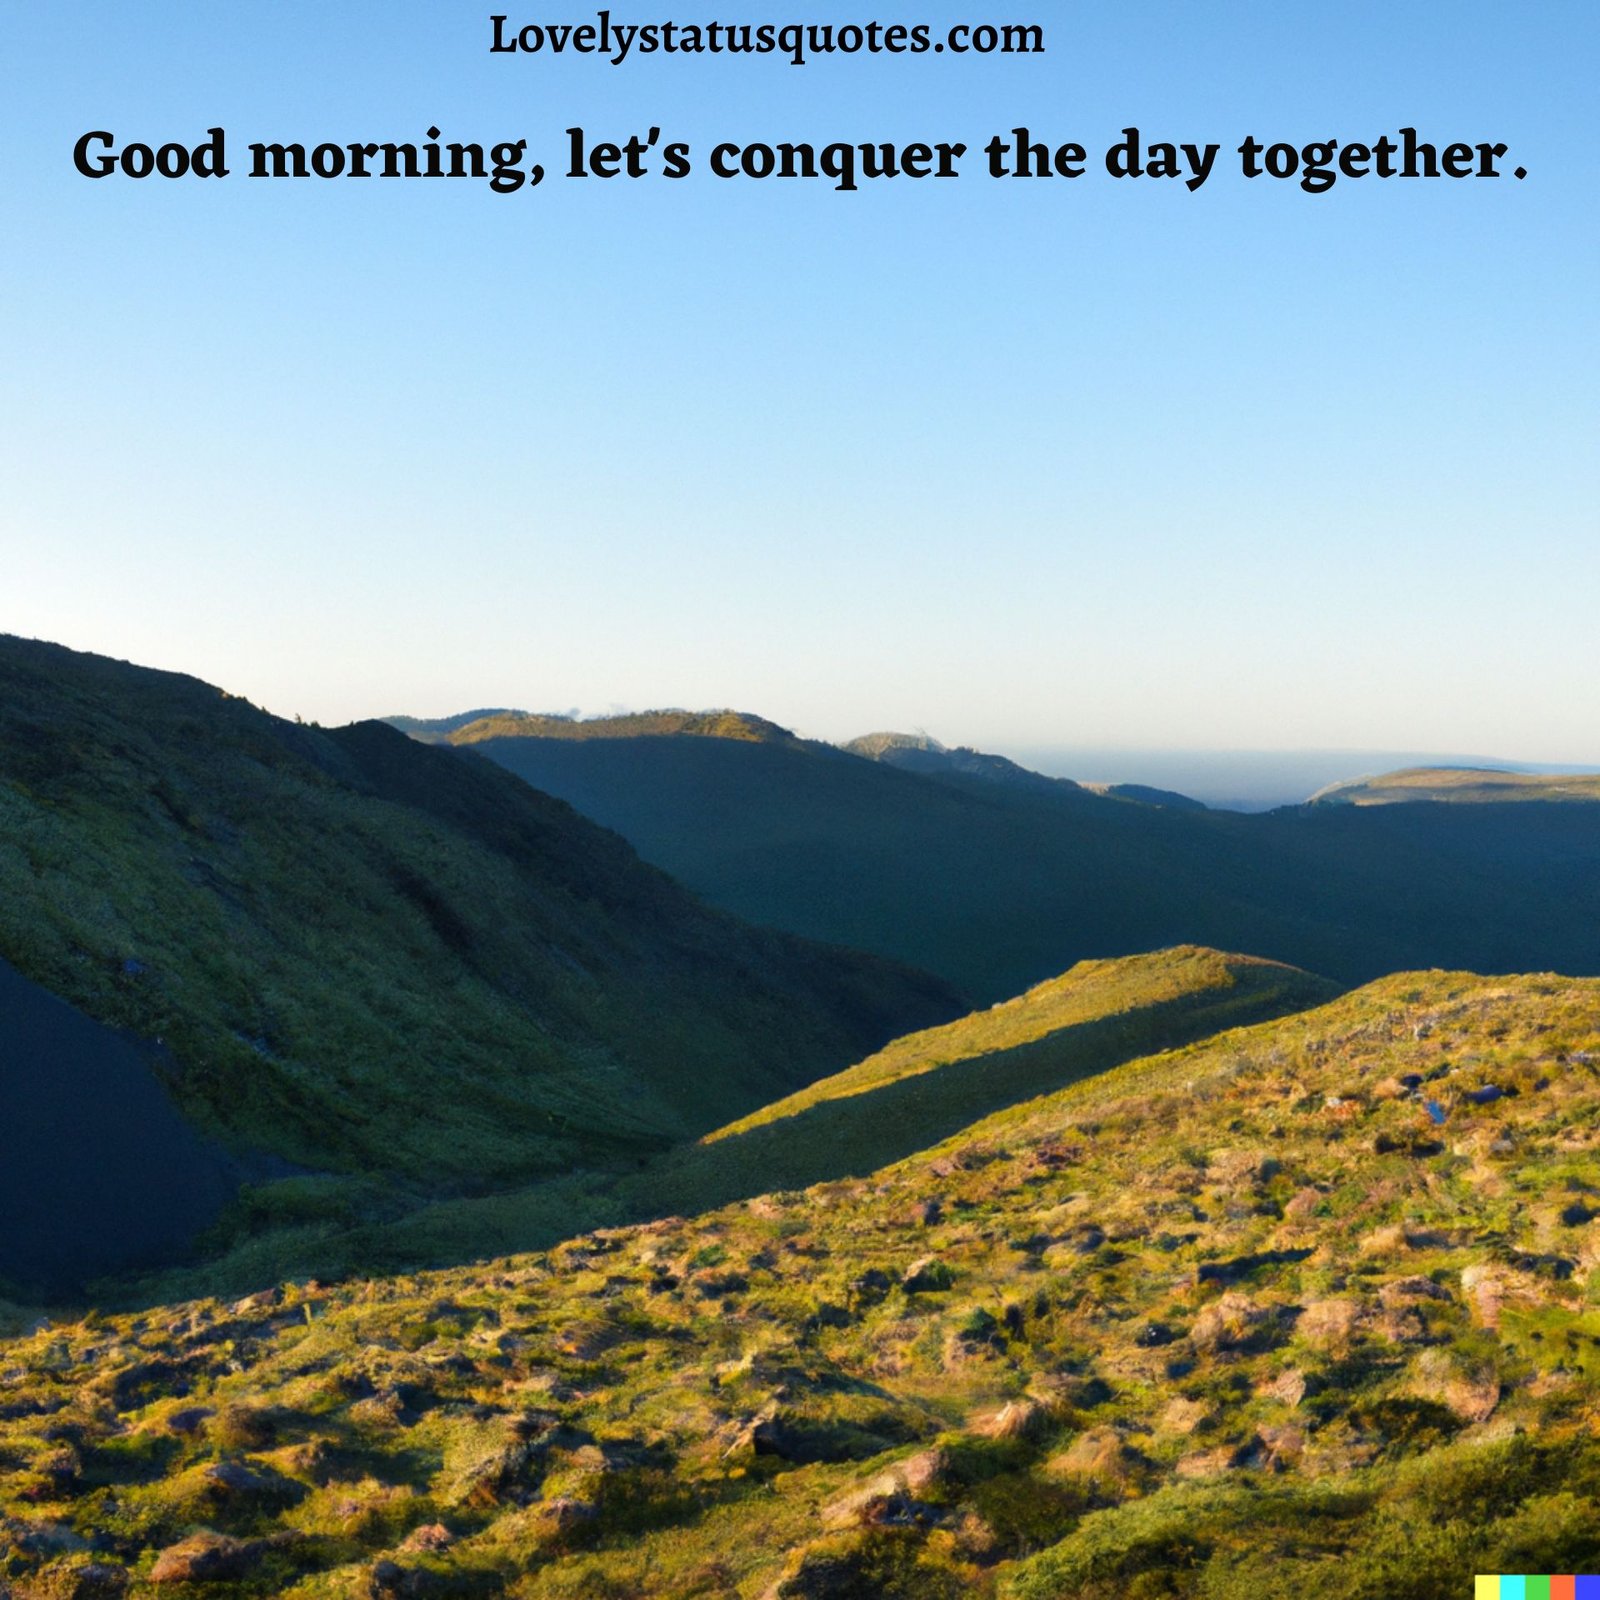 Good Morning let's conquer the day together.